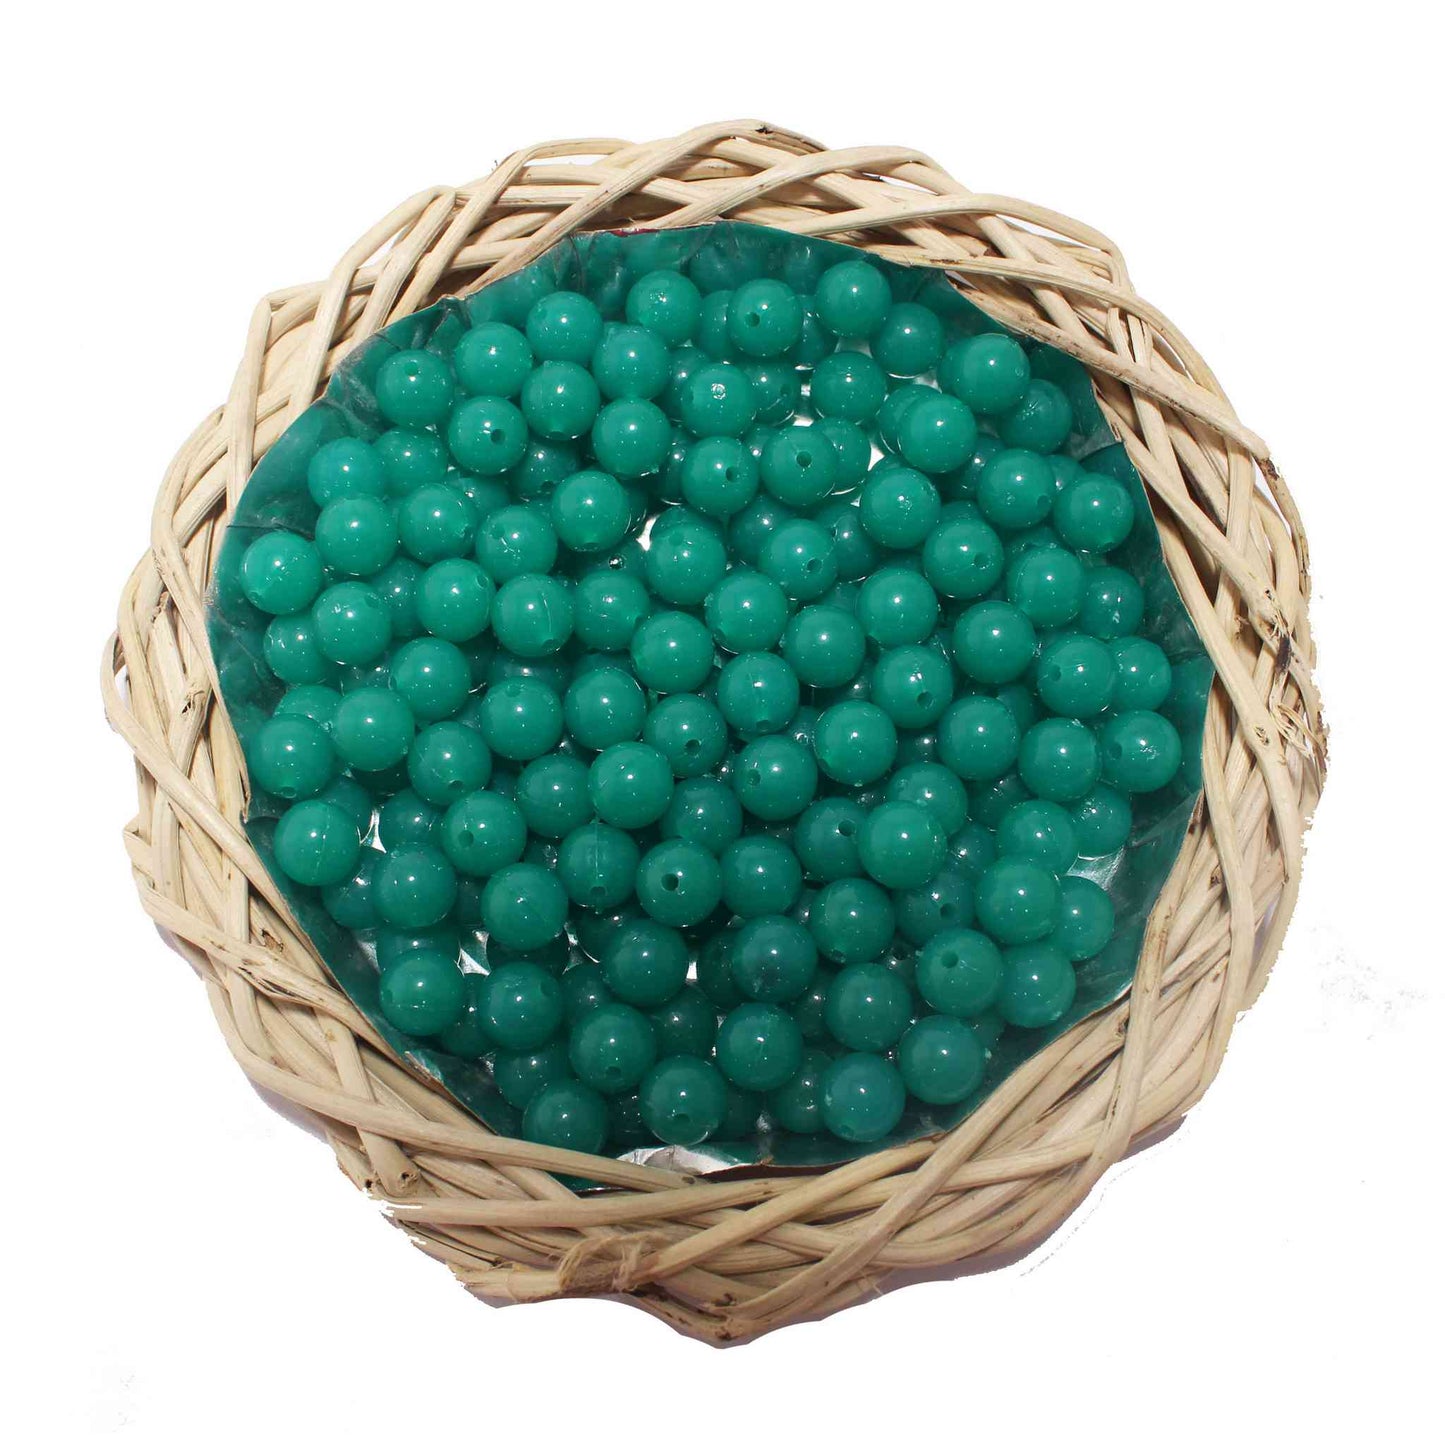 Indian Petals Premium quality Round Glass Beads for DIY Craft, Trousseau Packing or Decoration - Design 734, Sea Green - Indian Petals